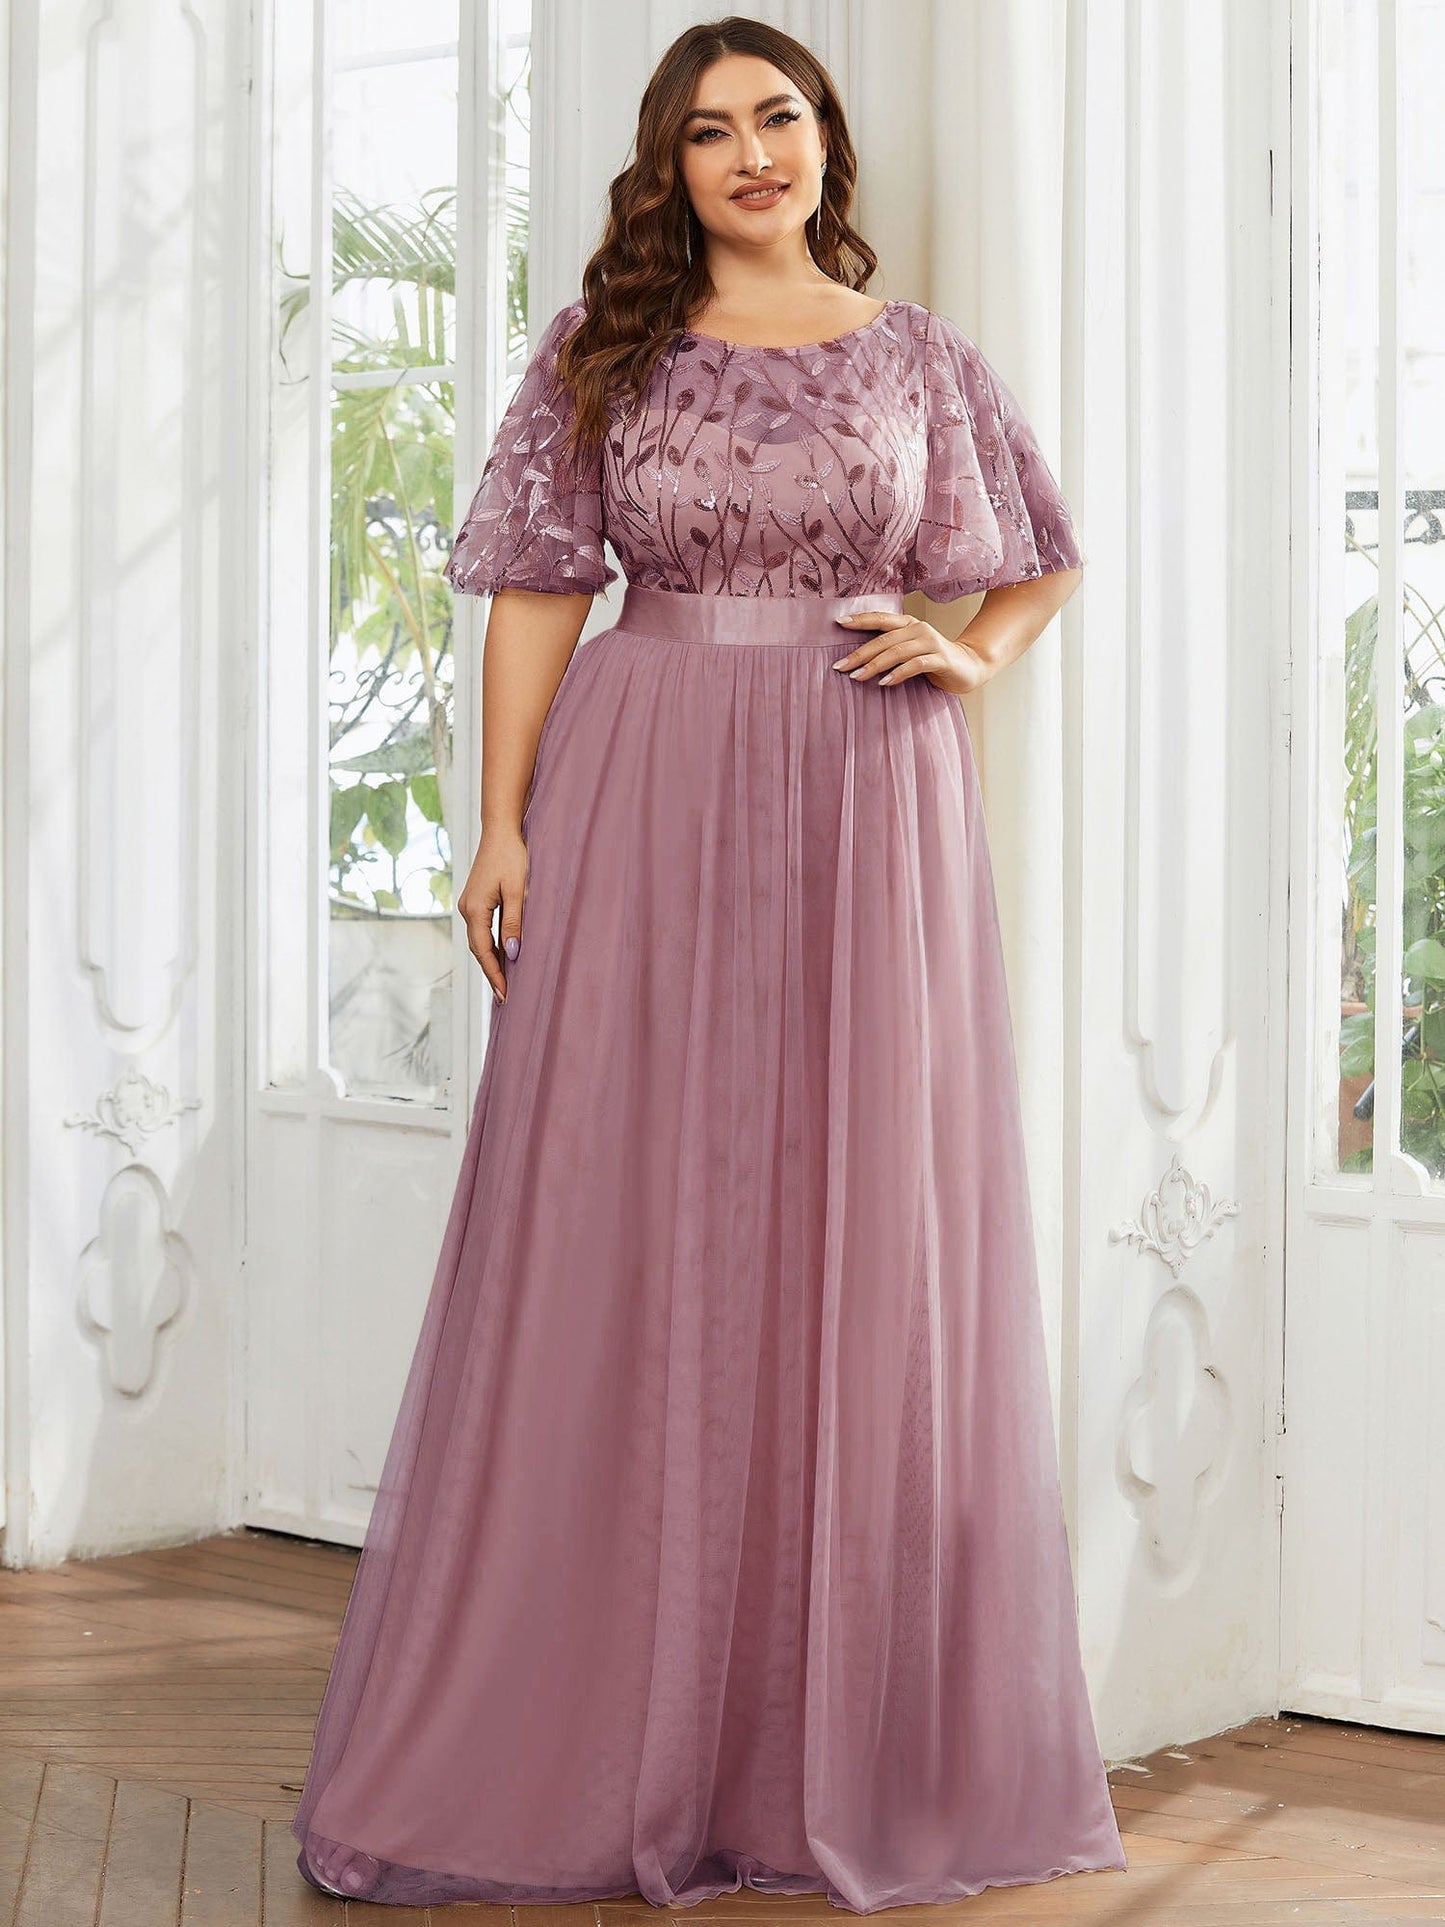 Plus Size Women's Embroidery Evening Dresses with Short Sleeve DRE230970117POH16 RosyBrown / 16